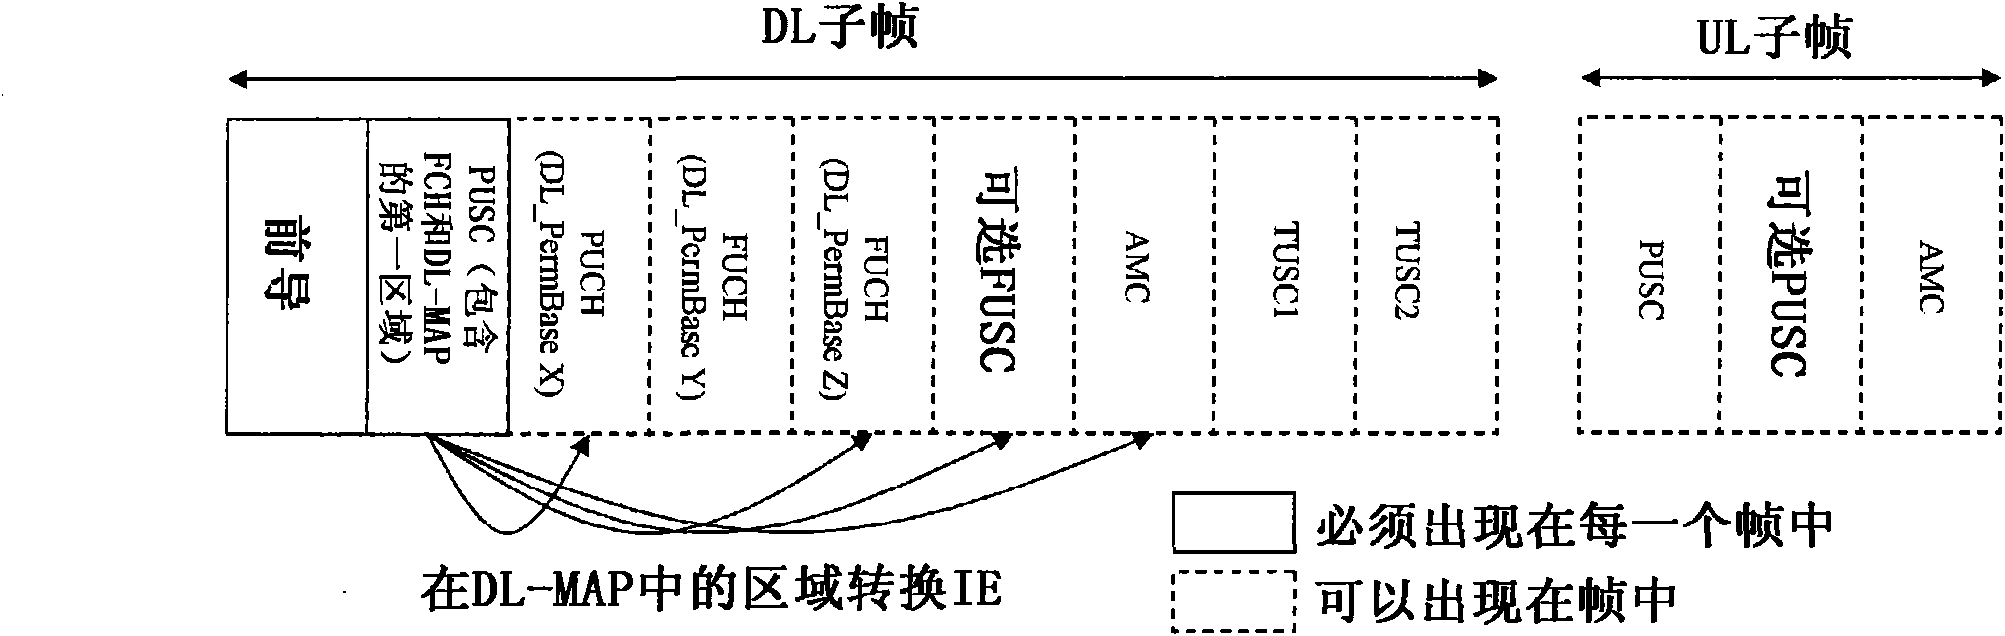 Downlink localized and distributed multiplexing in a frequency division multiplexing manner